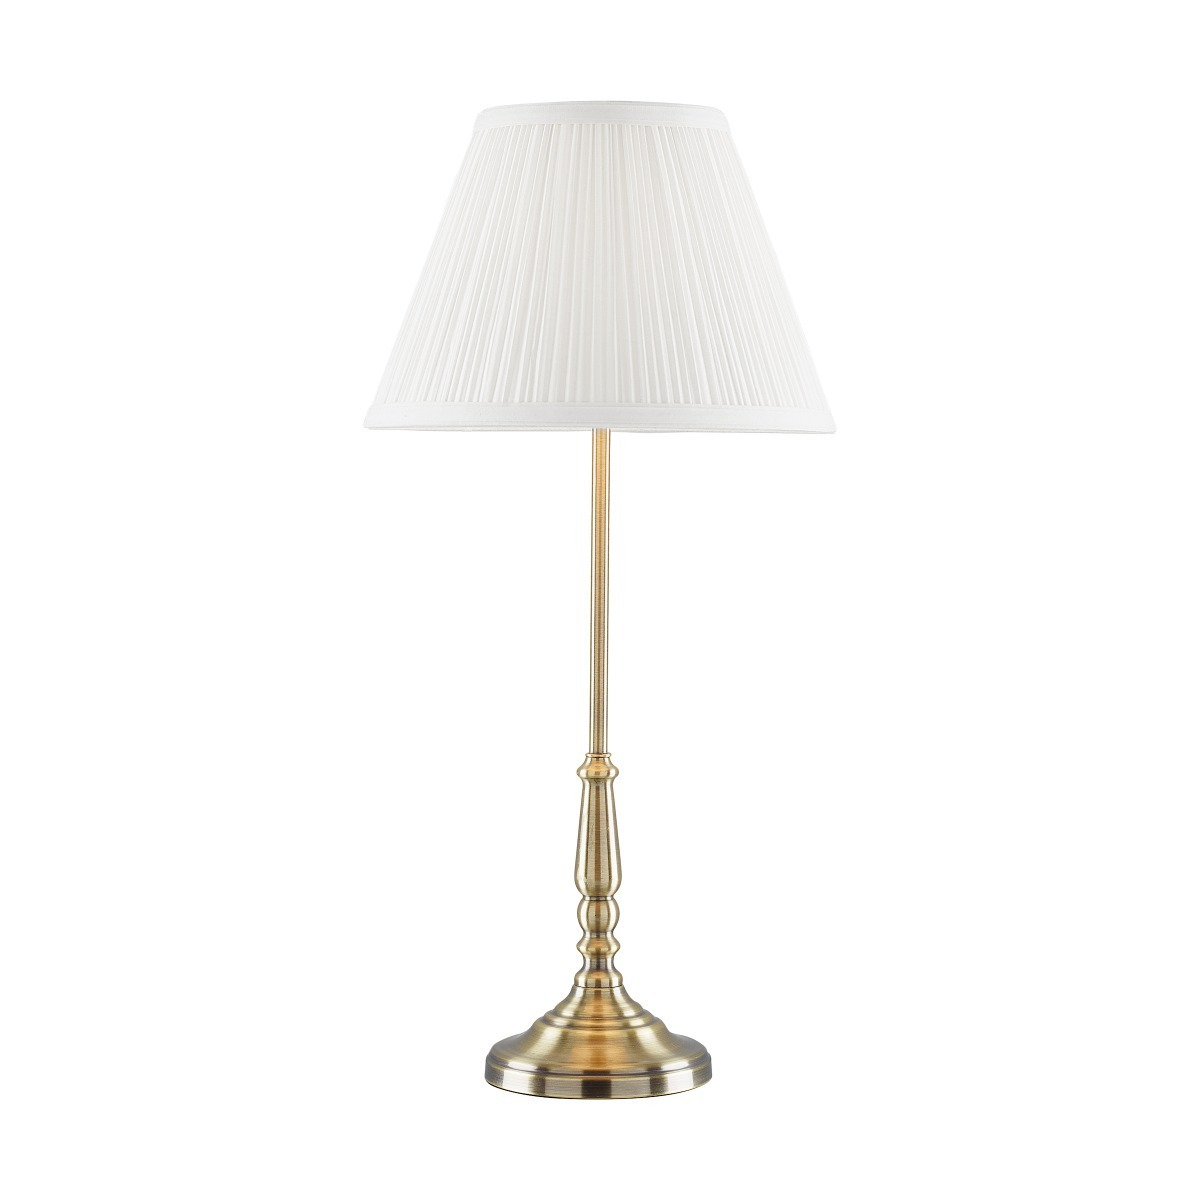 Laura Ashley Elliot Table Lamp In Antique Brass Finish With White Shade